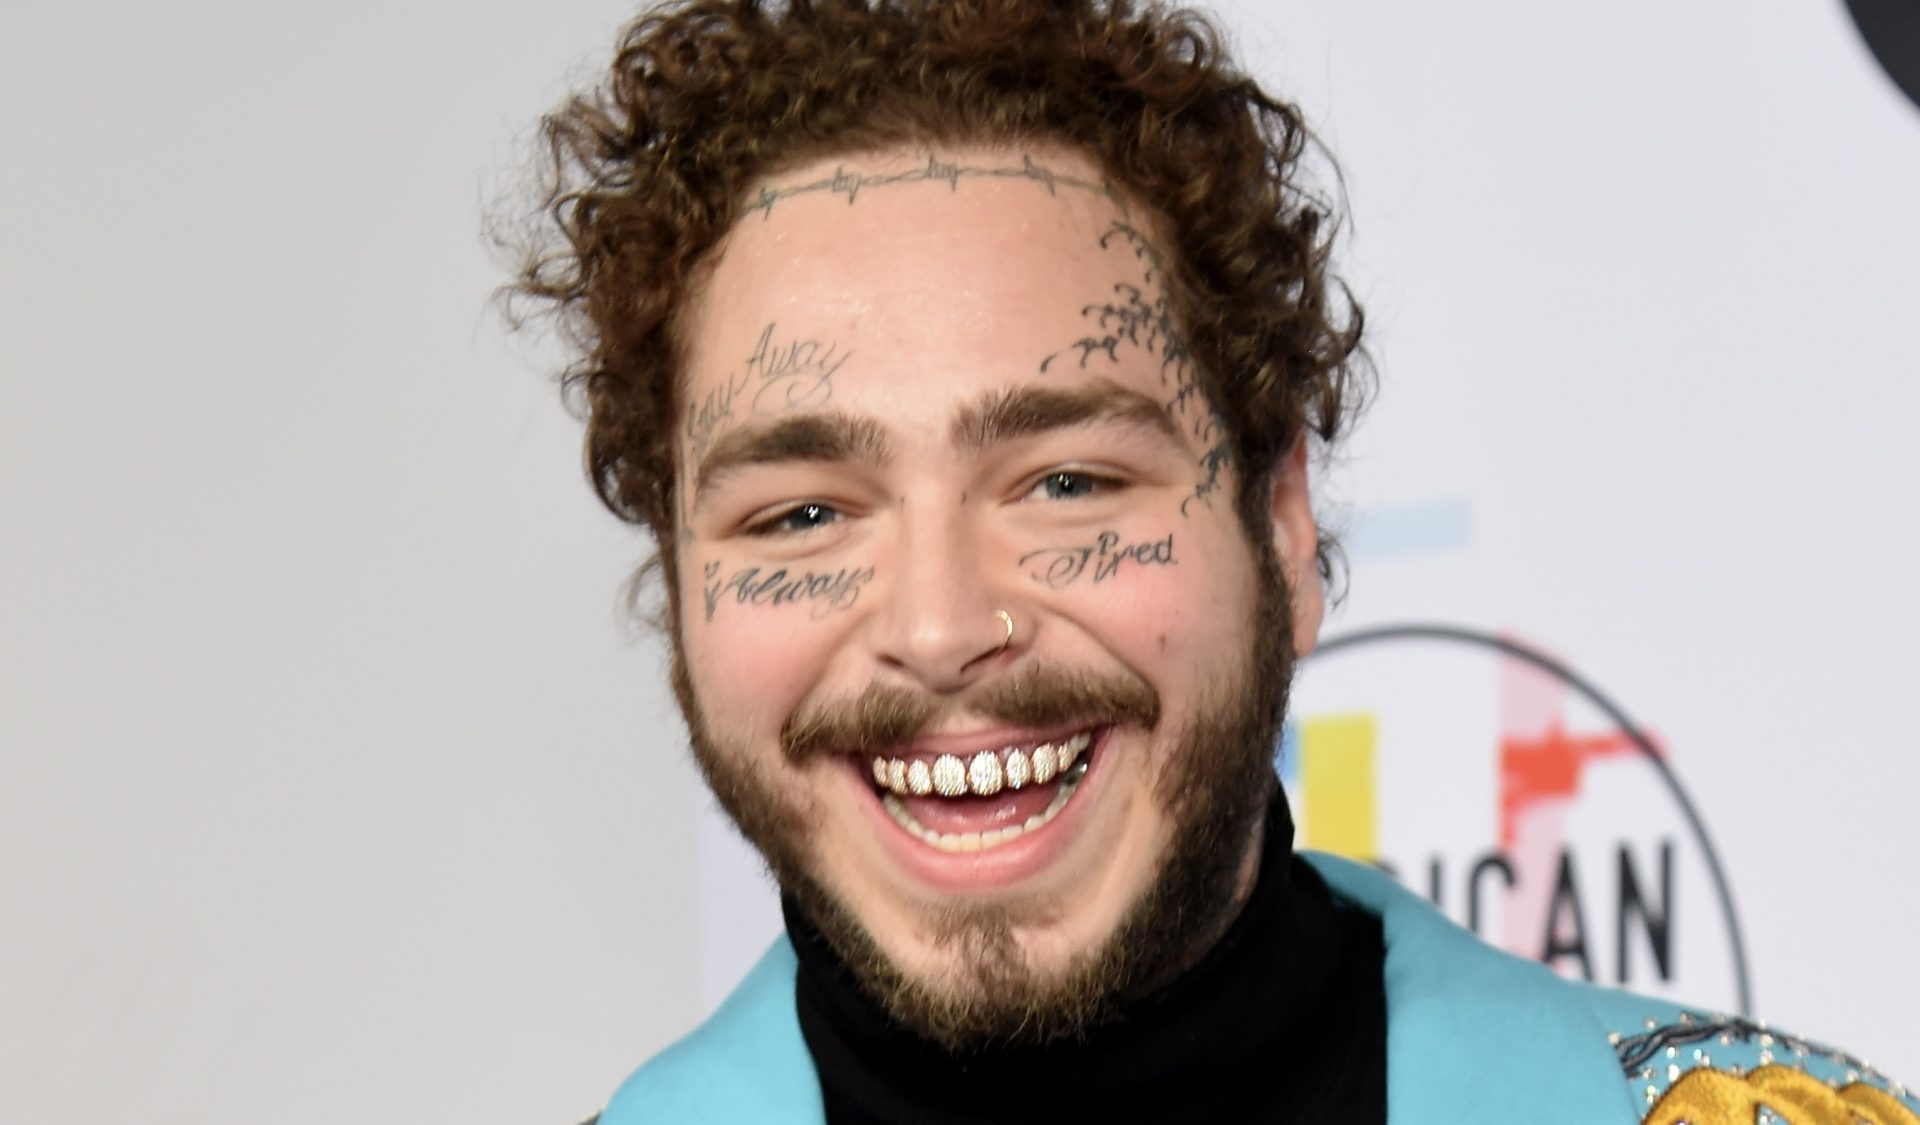 Post Malone Shuts Down Speculation Around Weight Loss & On-Stage Antics: ‘I’m Not Doing Drugs’